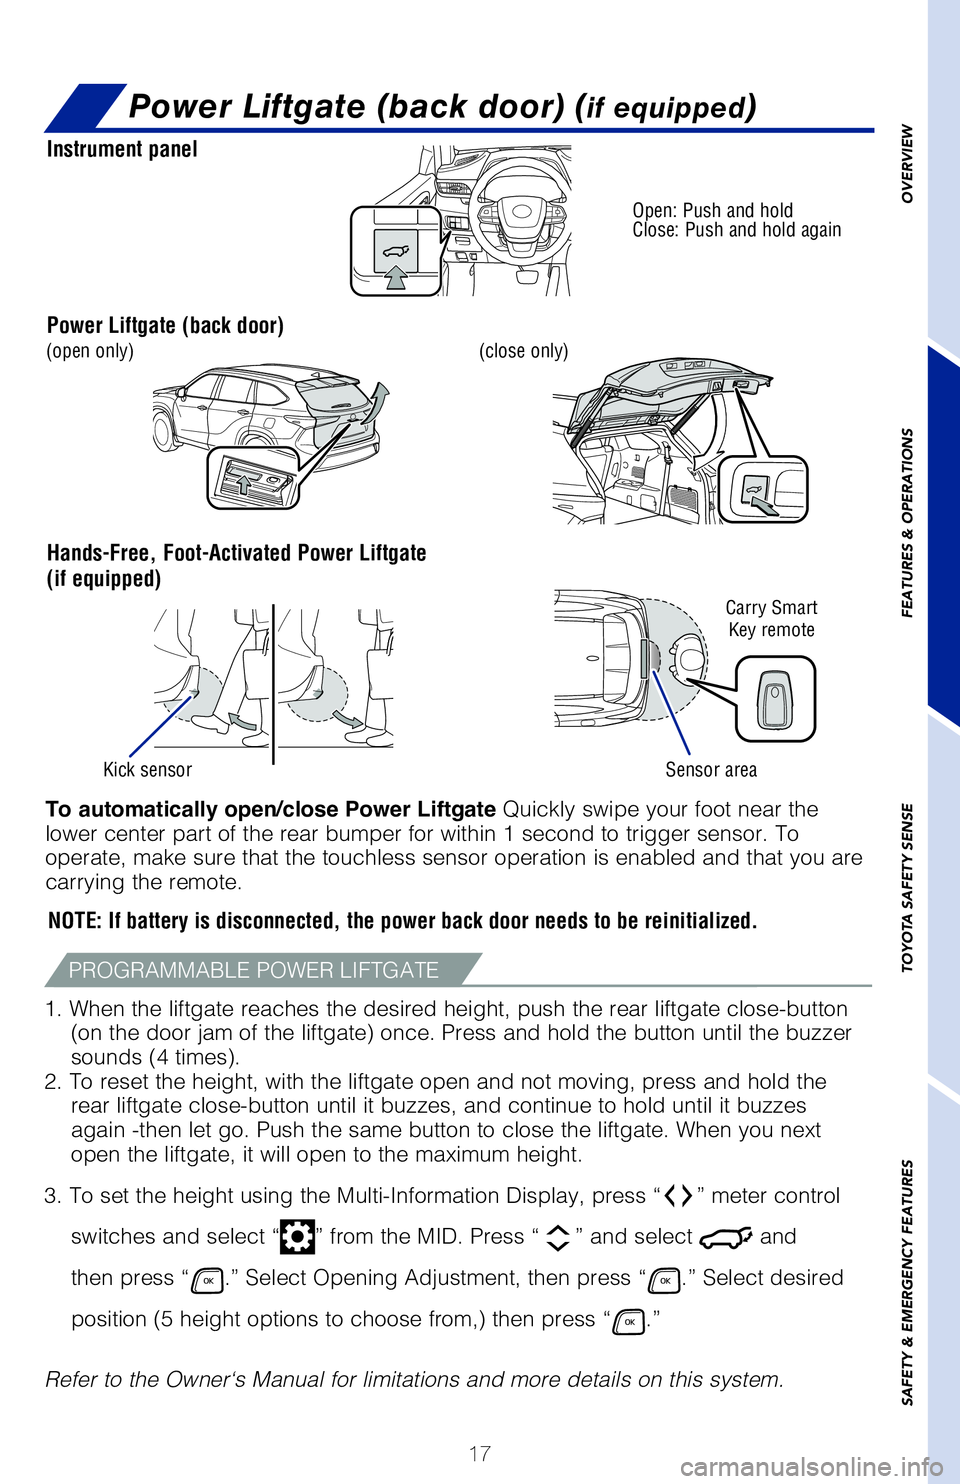 TOYOTA HIGHLANDER 2020   (in English) User Guide 17
OVERVIEW
FEATURES & OPERATIONS
TOYOTA SAFETY SENSE
SAFETY & EMERGENCY FEATURES
Power Liftgate (back door) (if equipped)
NOTE:   If battery is disconnected, the power back door needs to be reinitial